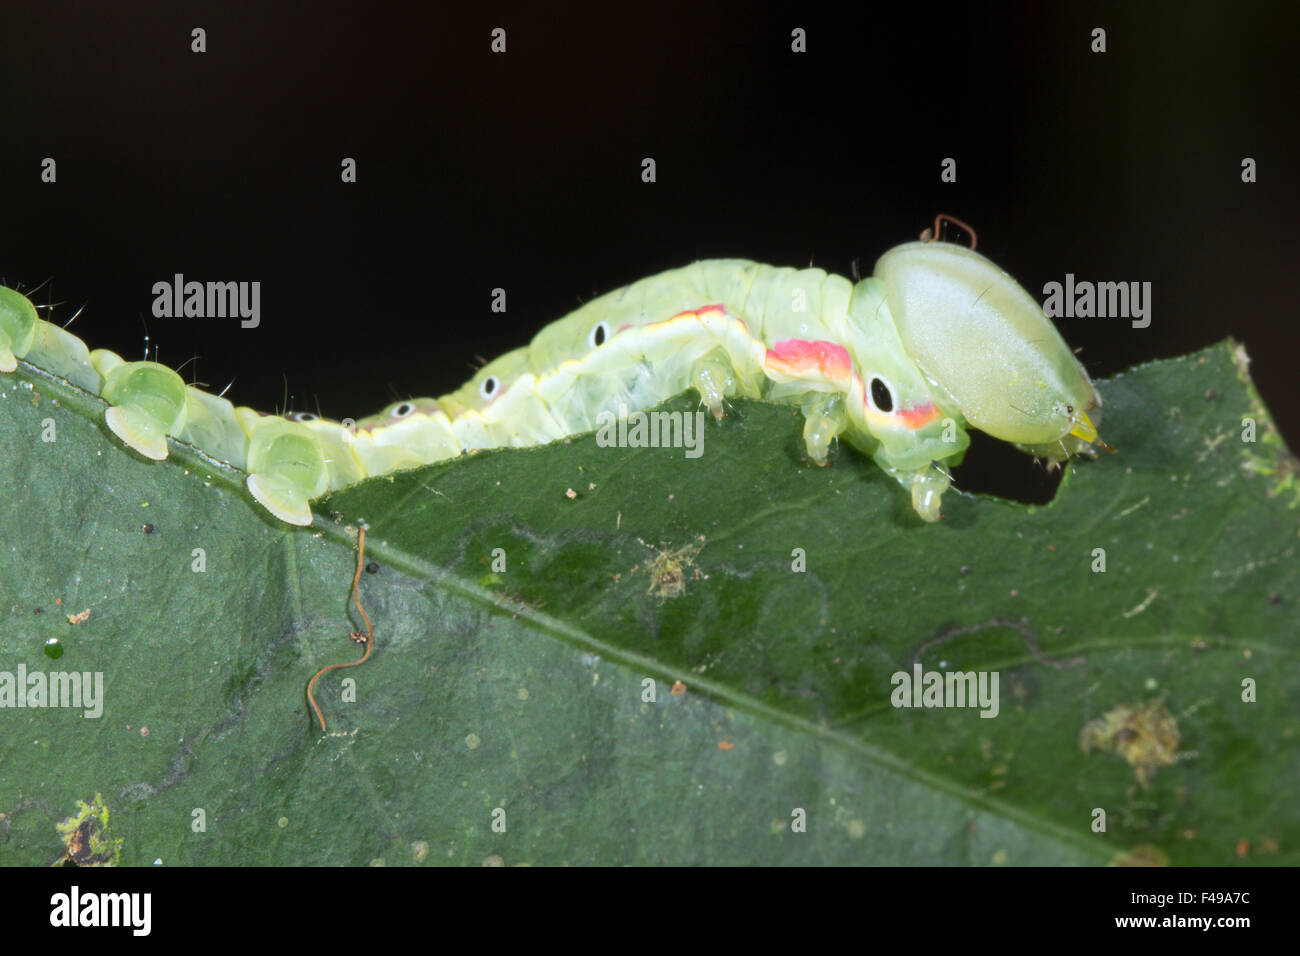 Cryptic green caterpillar eating a leaf in the rainforest, Ecuador Stock Photo